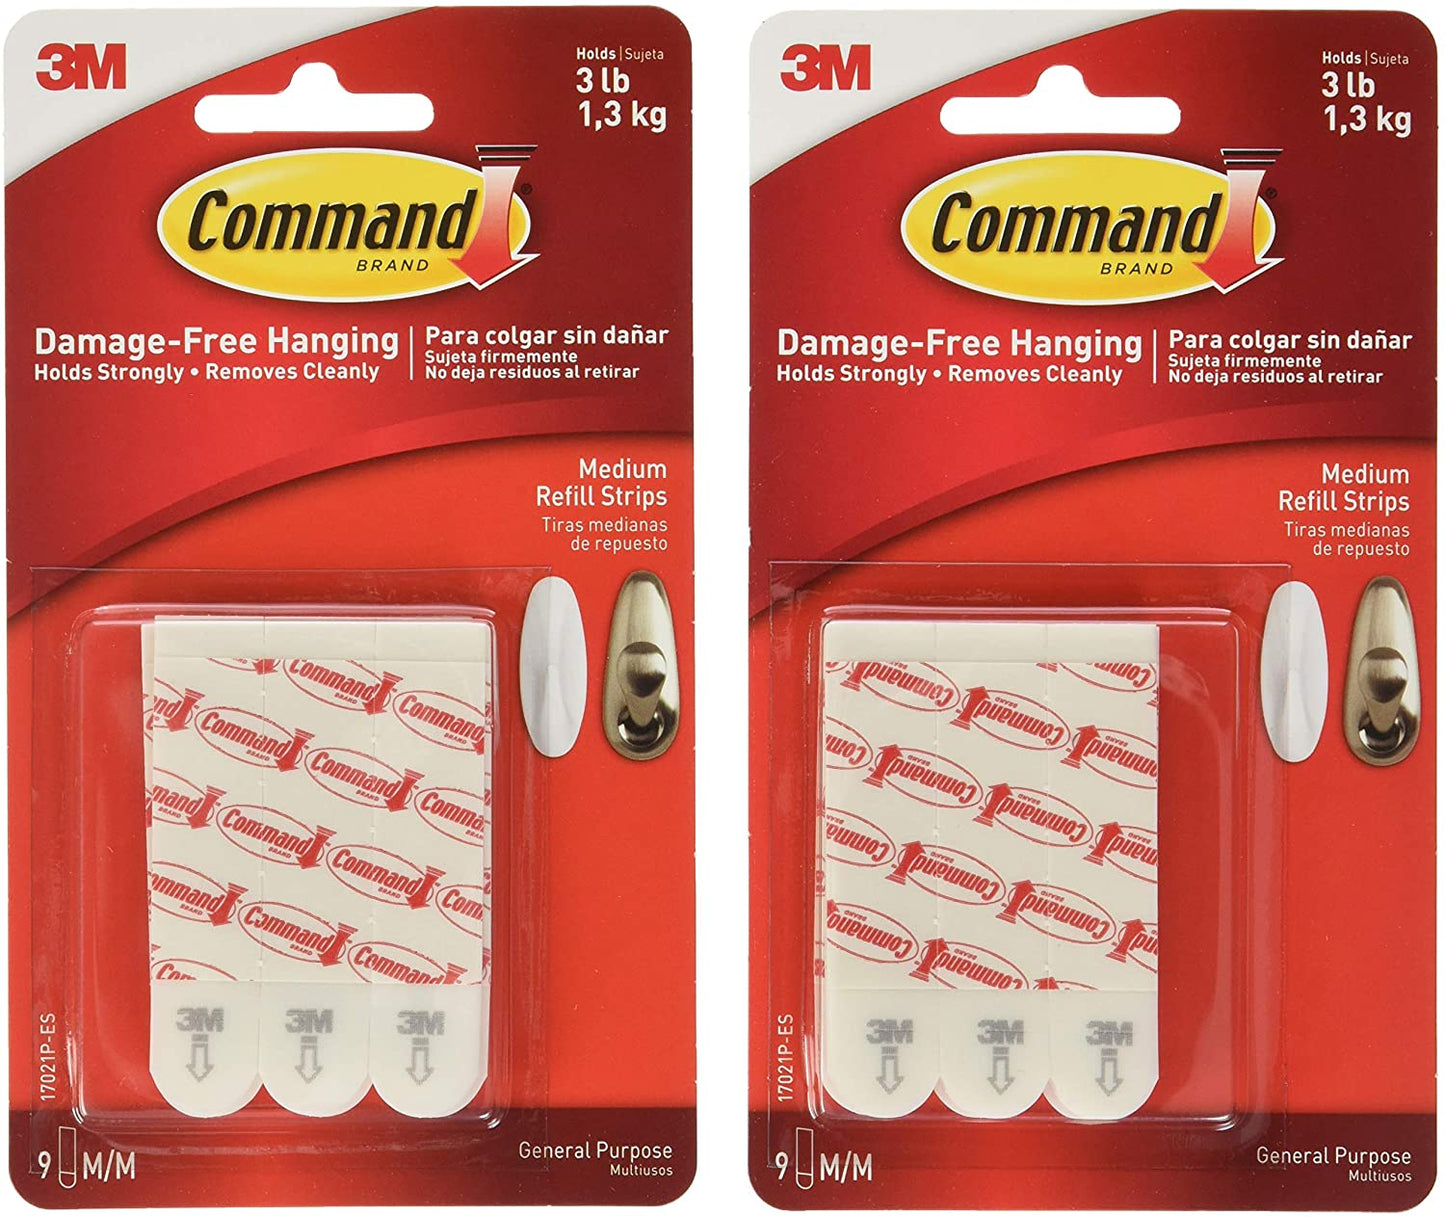 Command Refill Strips, Medium, 18-Strips White, Damage-Free Hanging, Holds Strongly - Pack of 2